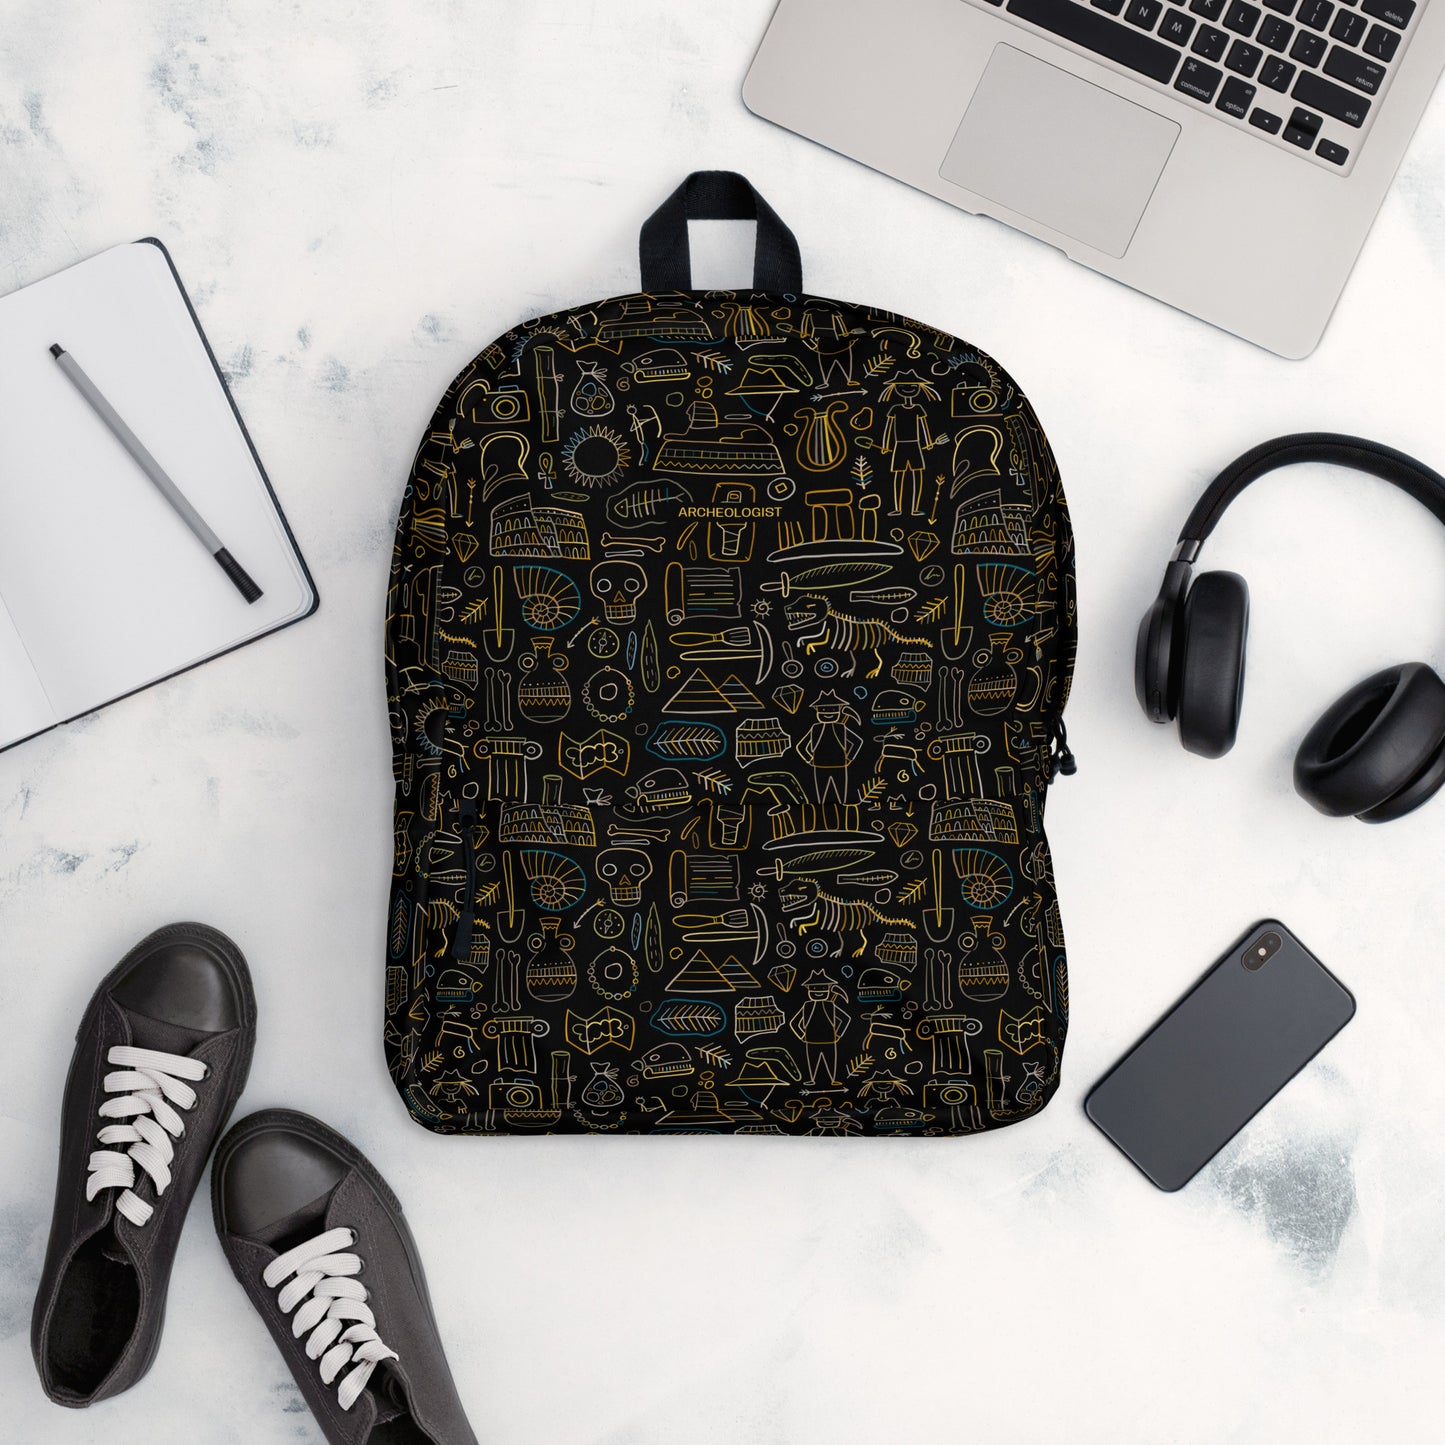 Personalised Backpack for Archeology lover, stylish designer print on black. Basic text you can change - Archeologist